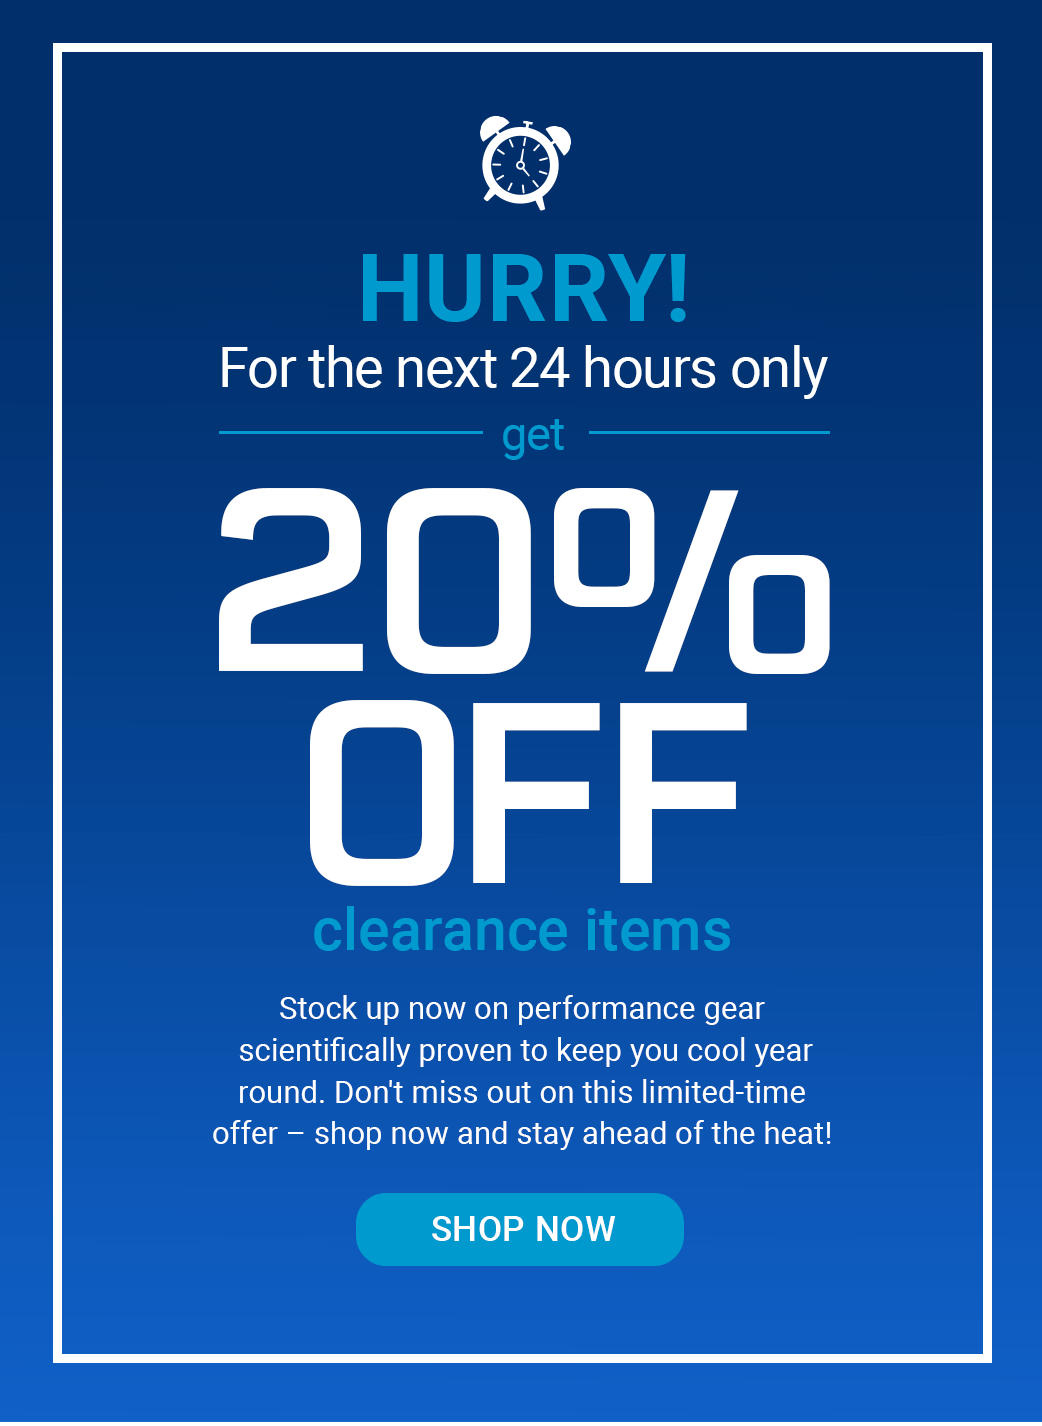 Hurry! For the next 24 hours only, get 20% off clearance items. Stock up now on performance gear scientifically proven to keep you cool year round. Don't miss out on this limited-time offer – shop now and stay ahead of the heat! [SHOP NOW]